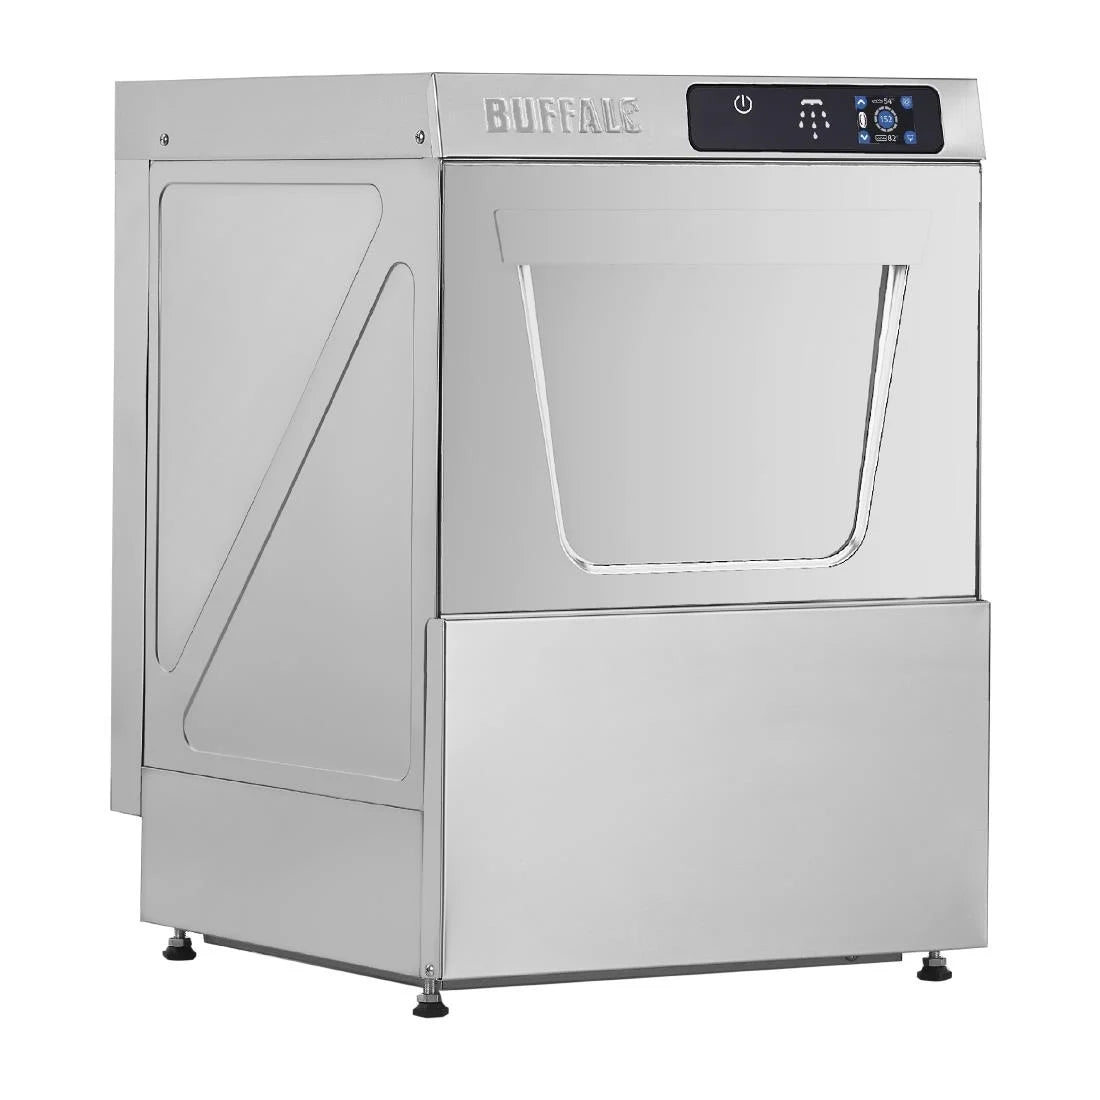 (Available 21/01/24) DK772 Buffalo Digital Countertop Glasswasher 350mm Basket 2.9kW JD Catering Equipment Solutions Ltd